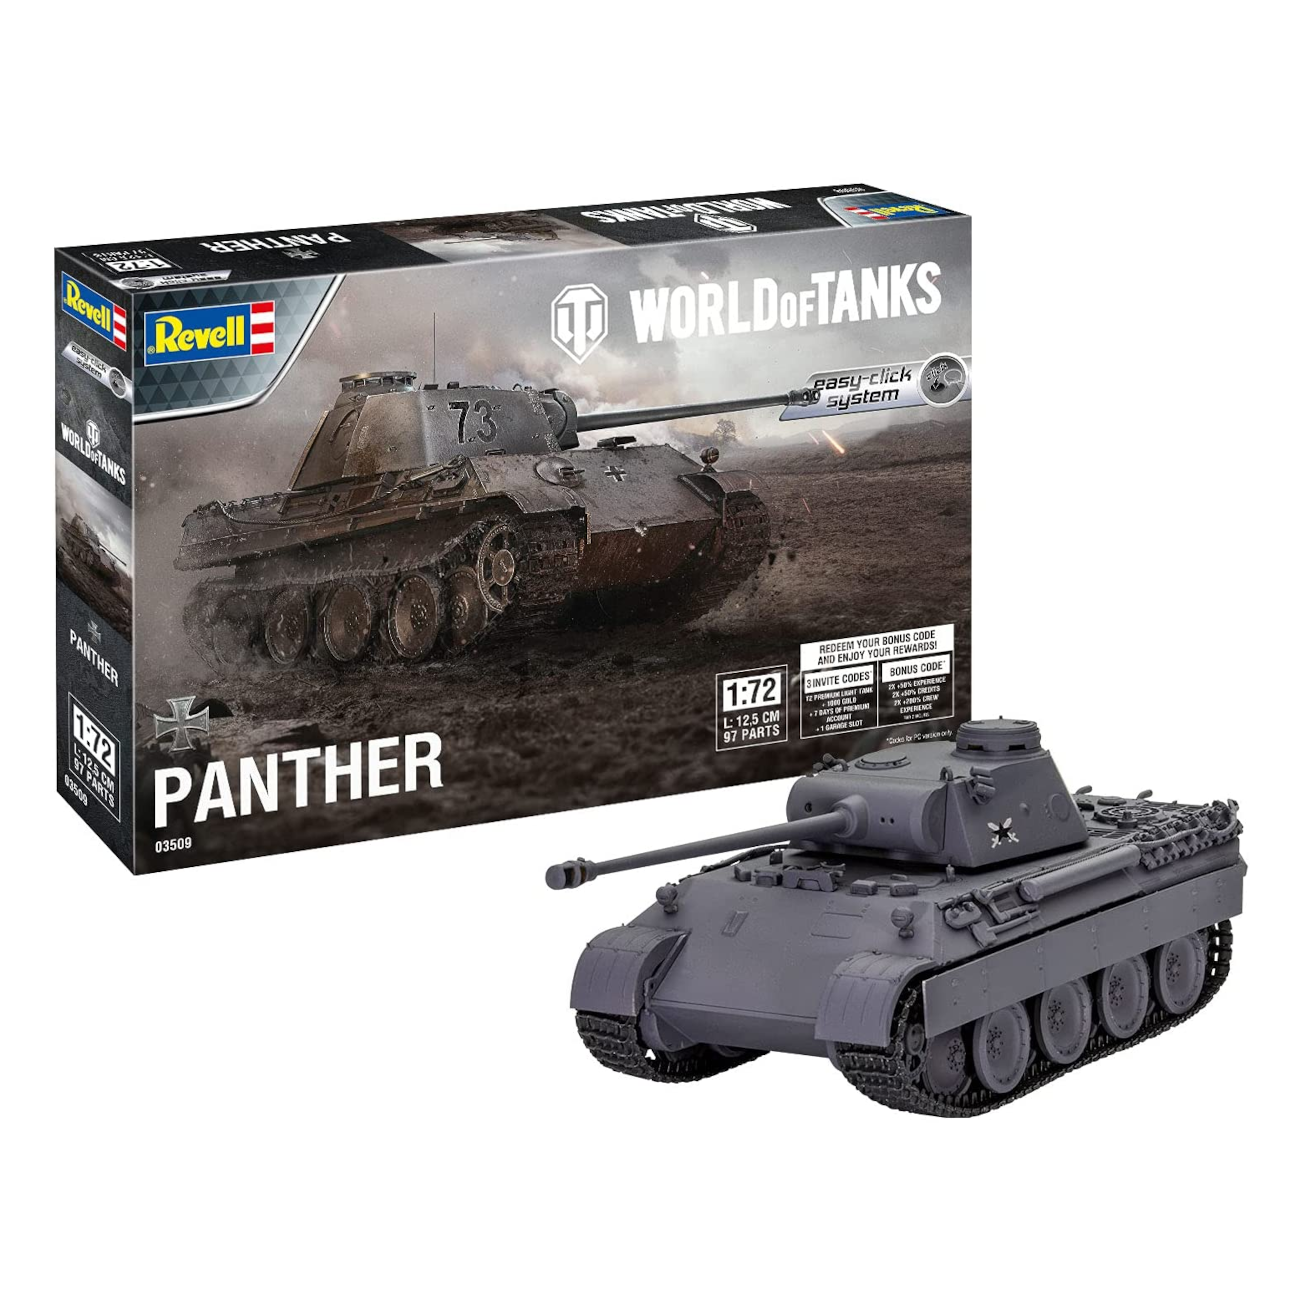 Revell 03509 -  Panther Ausf D - World of Tanks easy-click